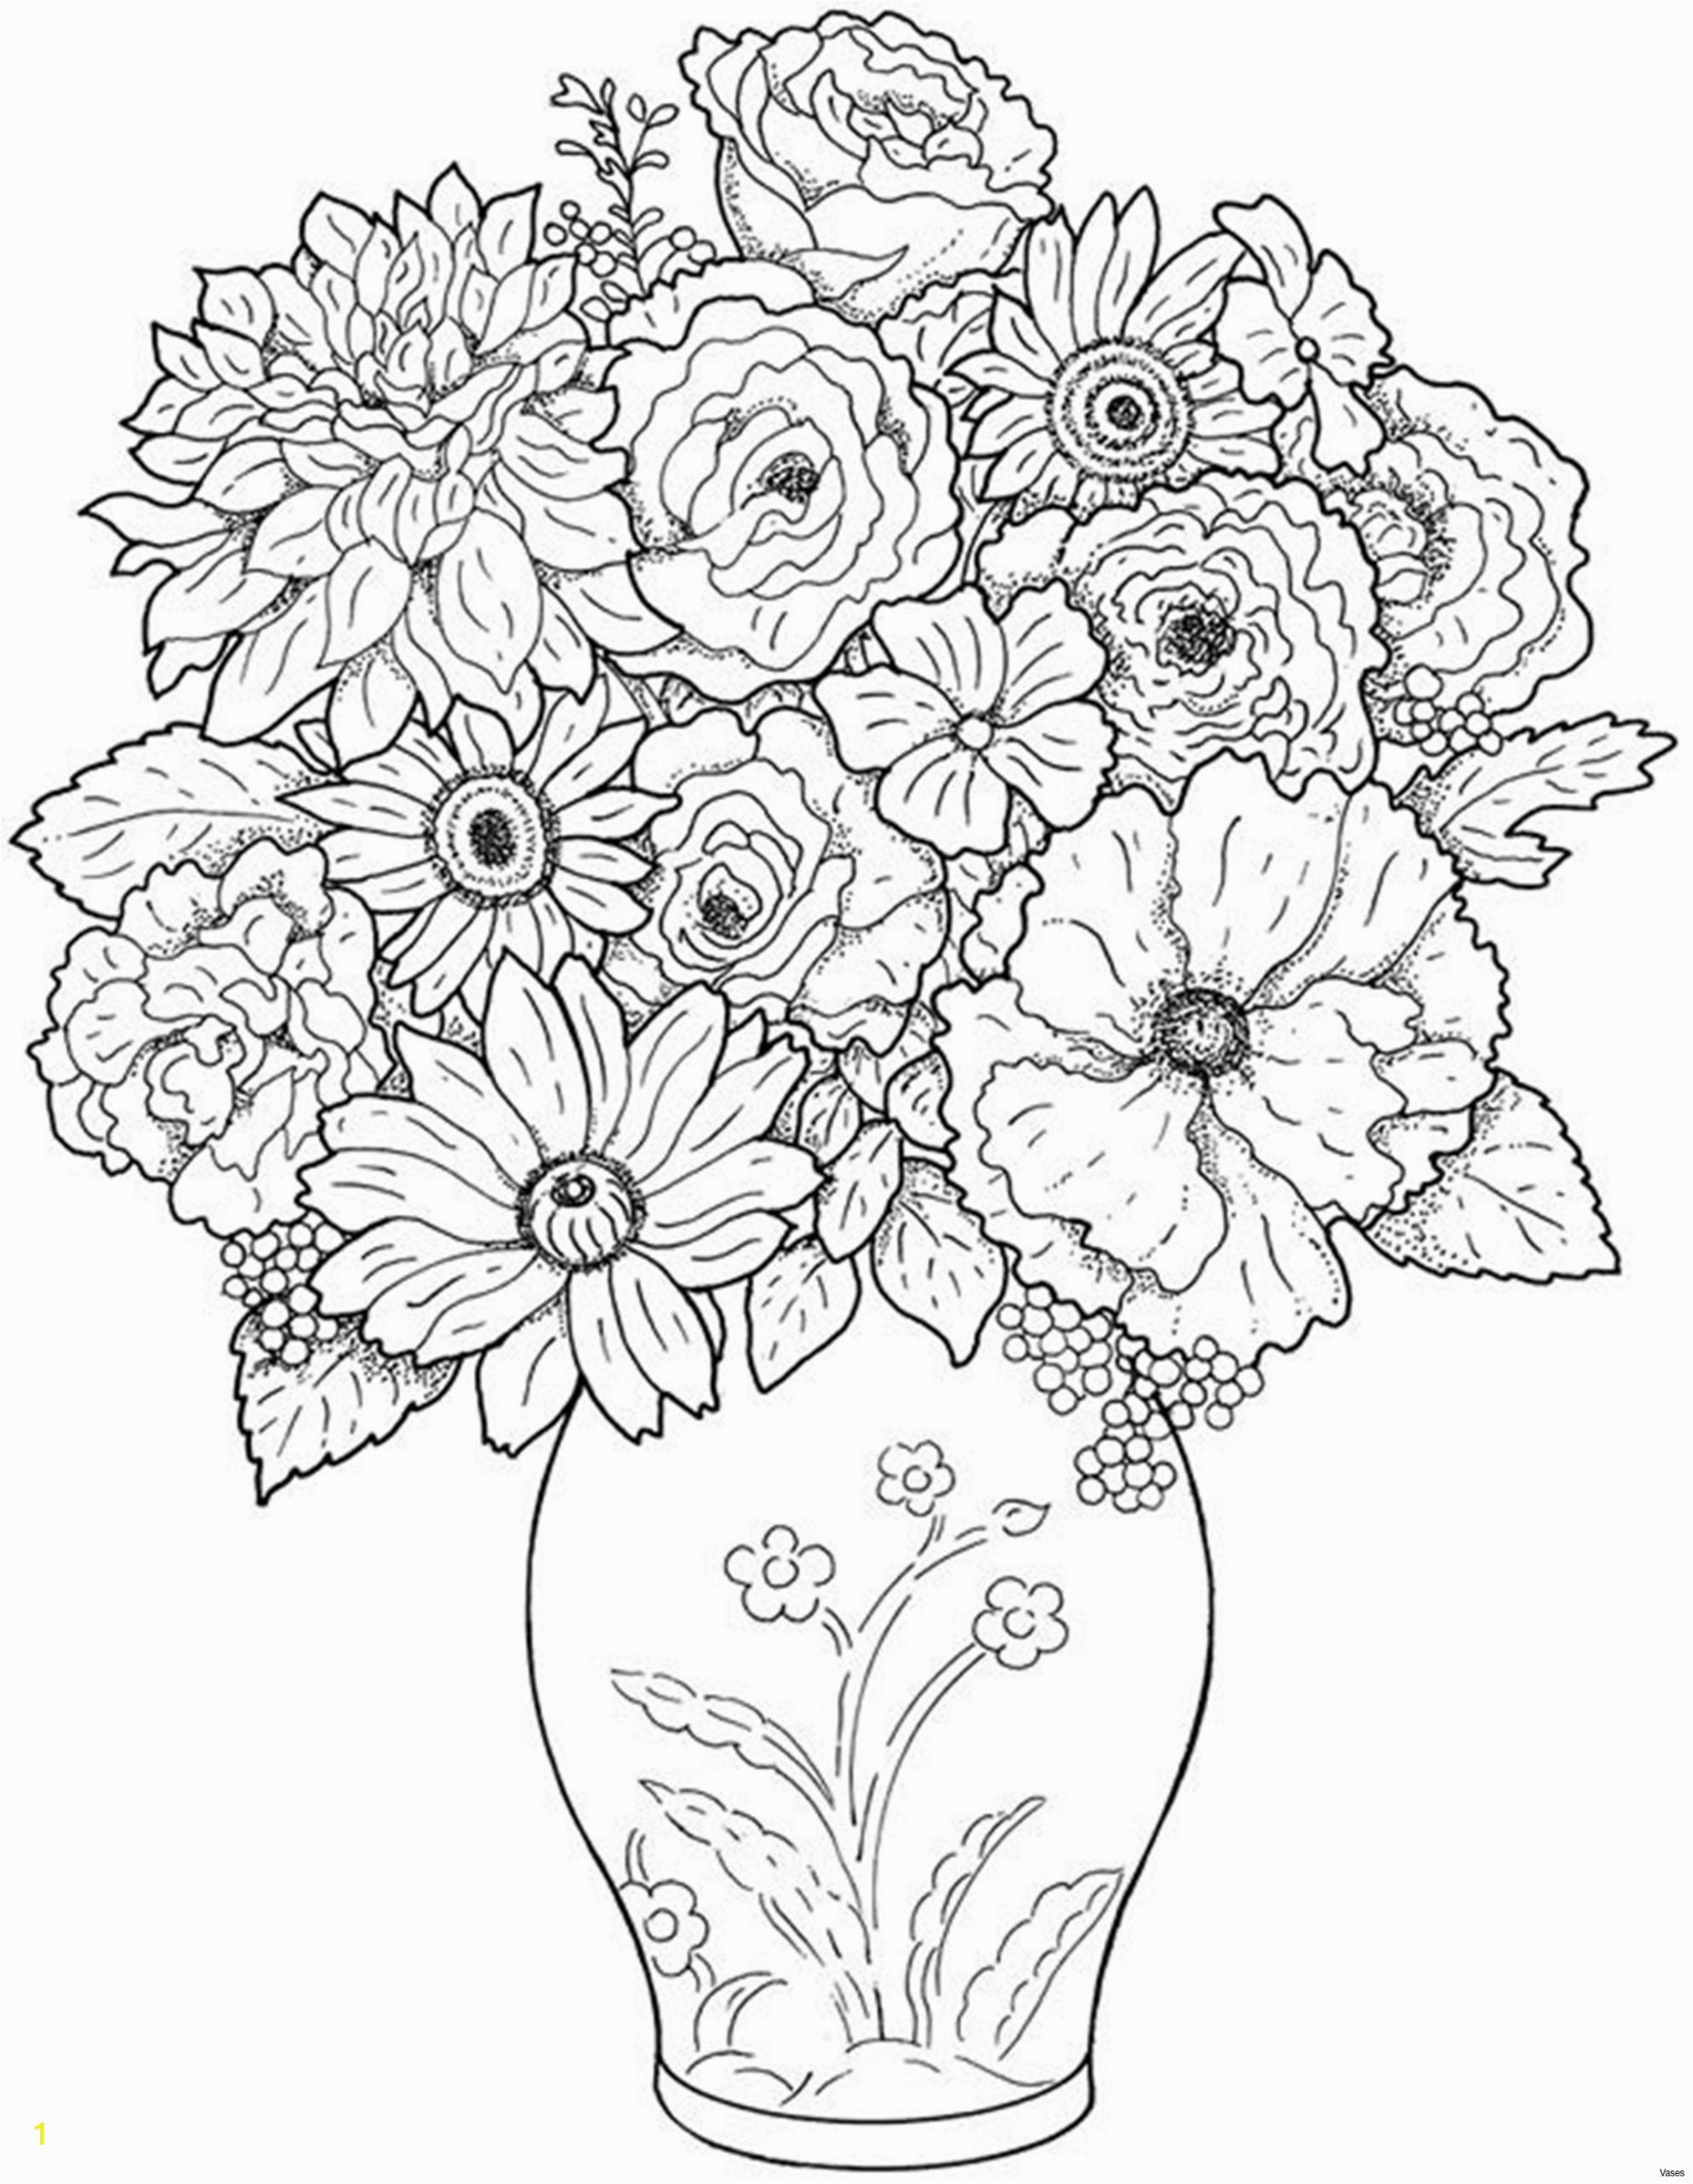 Coloring Page Of A Plant 14 attractive Black Floral Vase